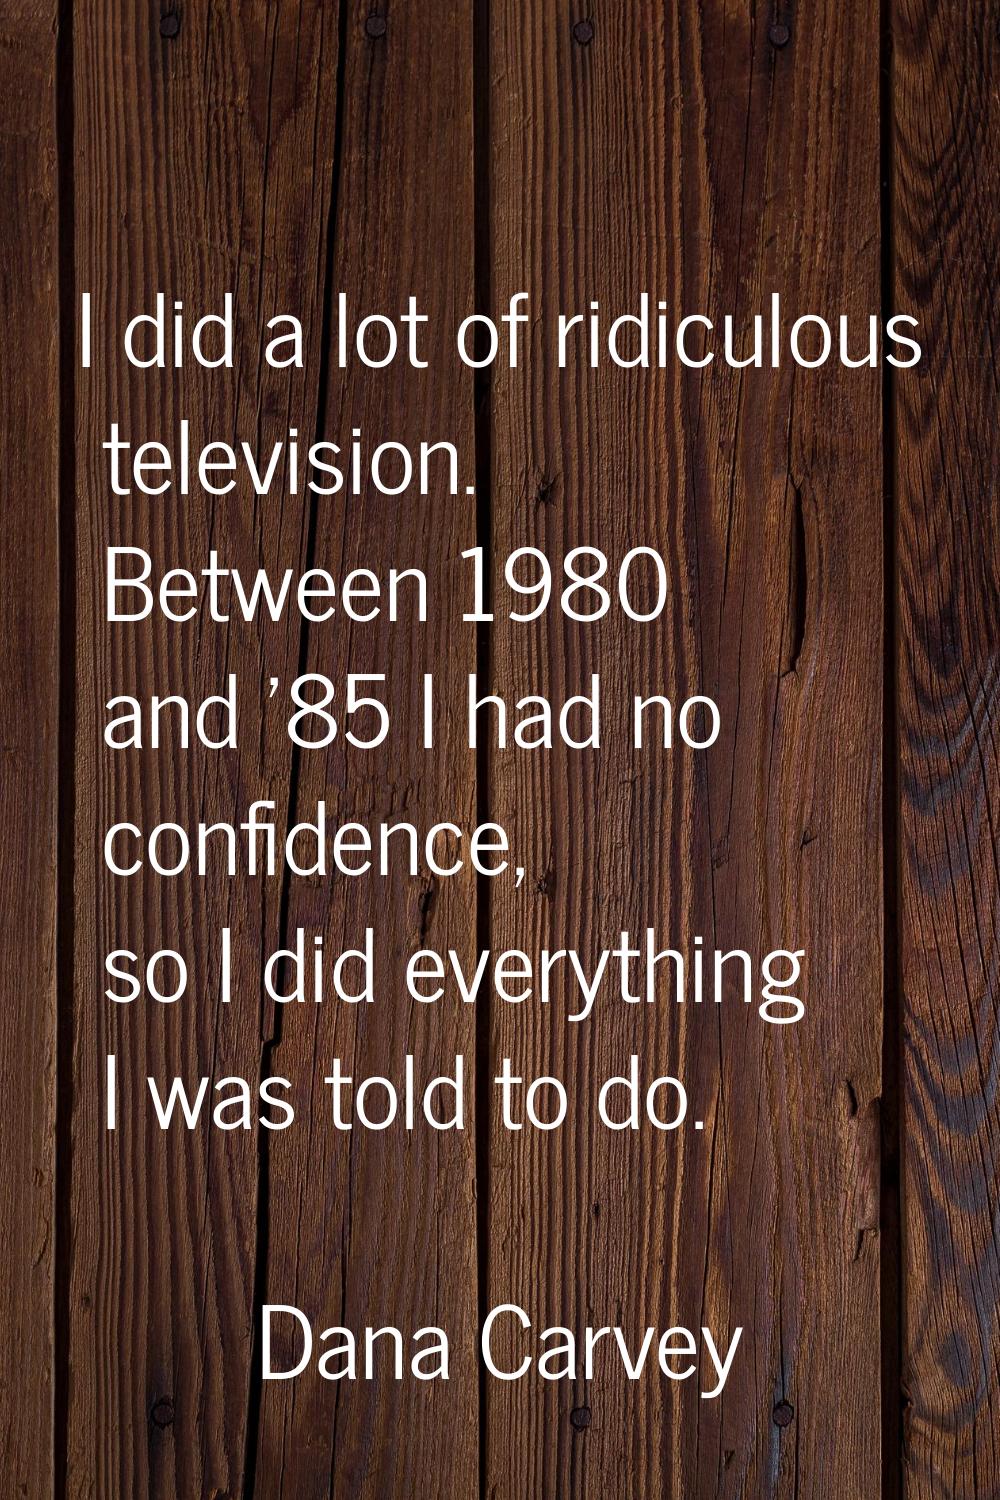 I did a lot of ridiculous television. Between 1980 and '85 I had no confidence, so I did everything